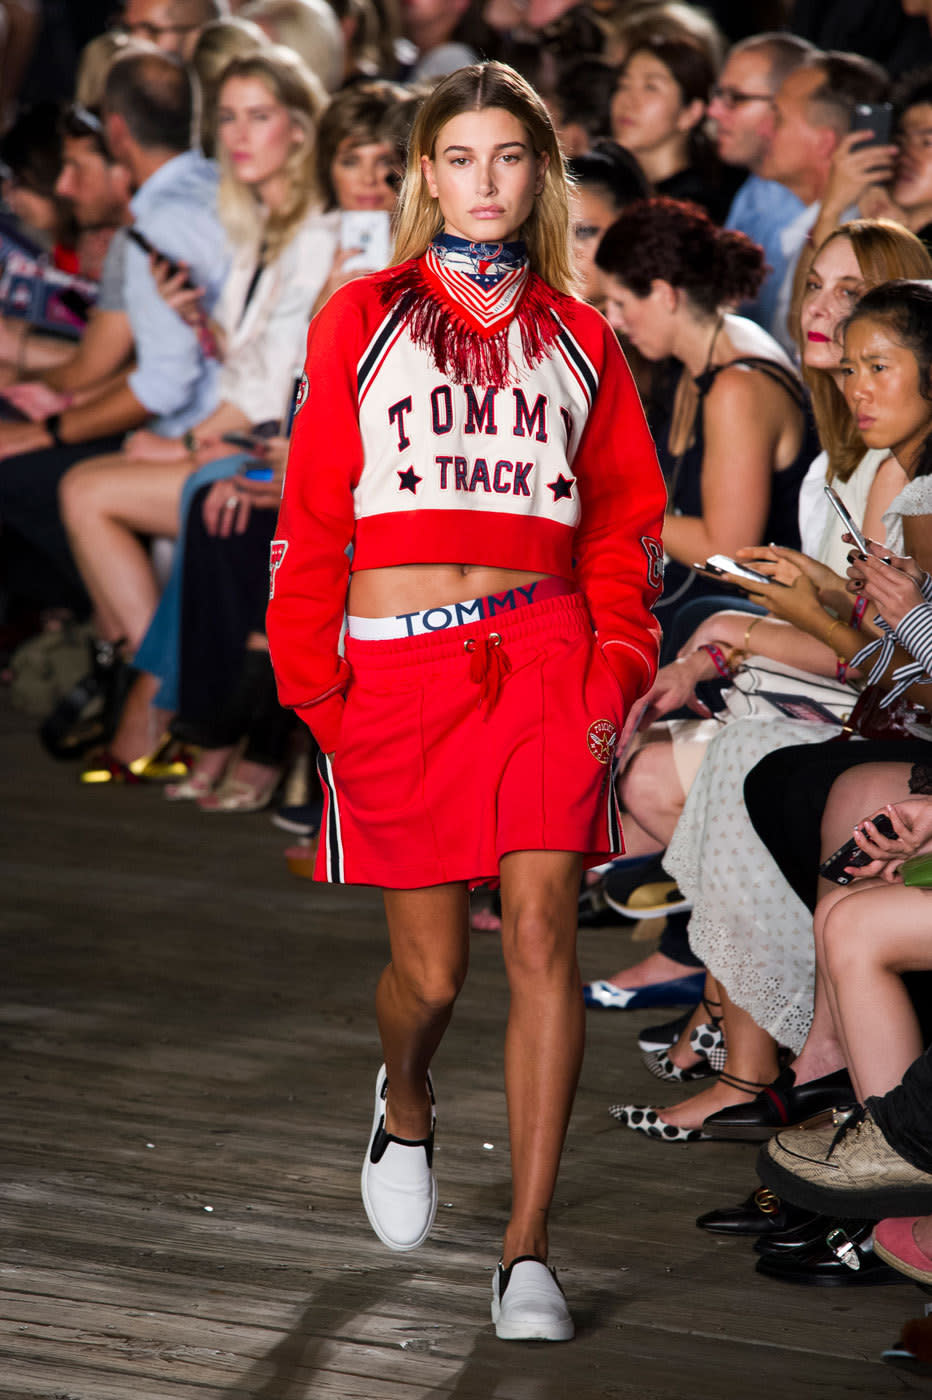 Tommy Hilfiger’s September 2016 NYFW show